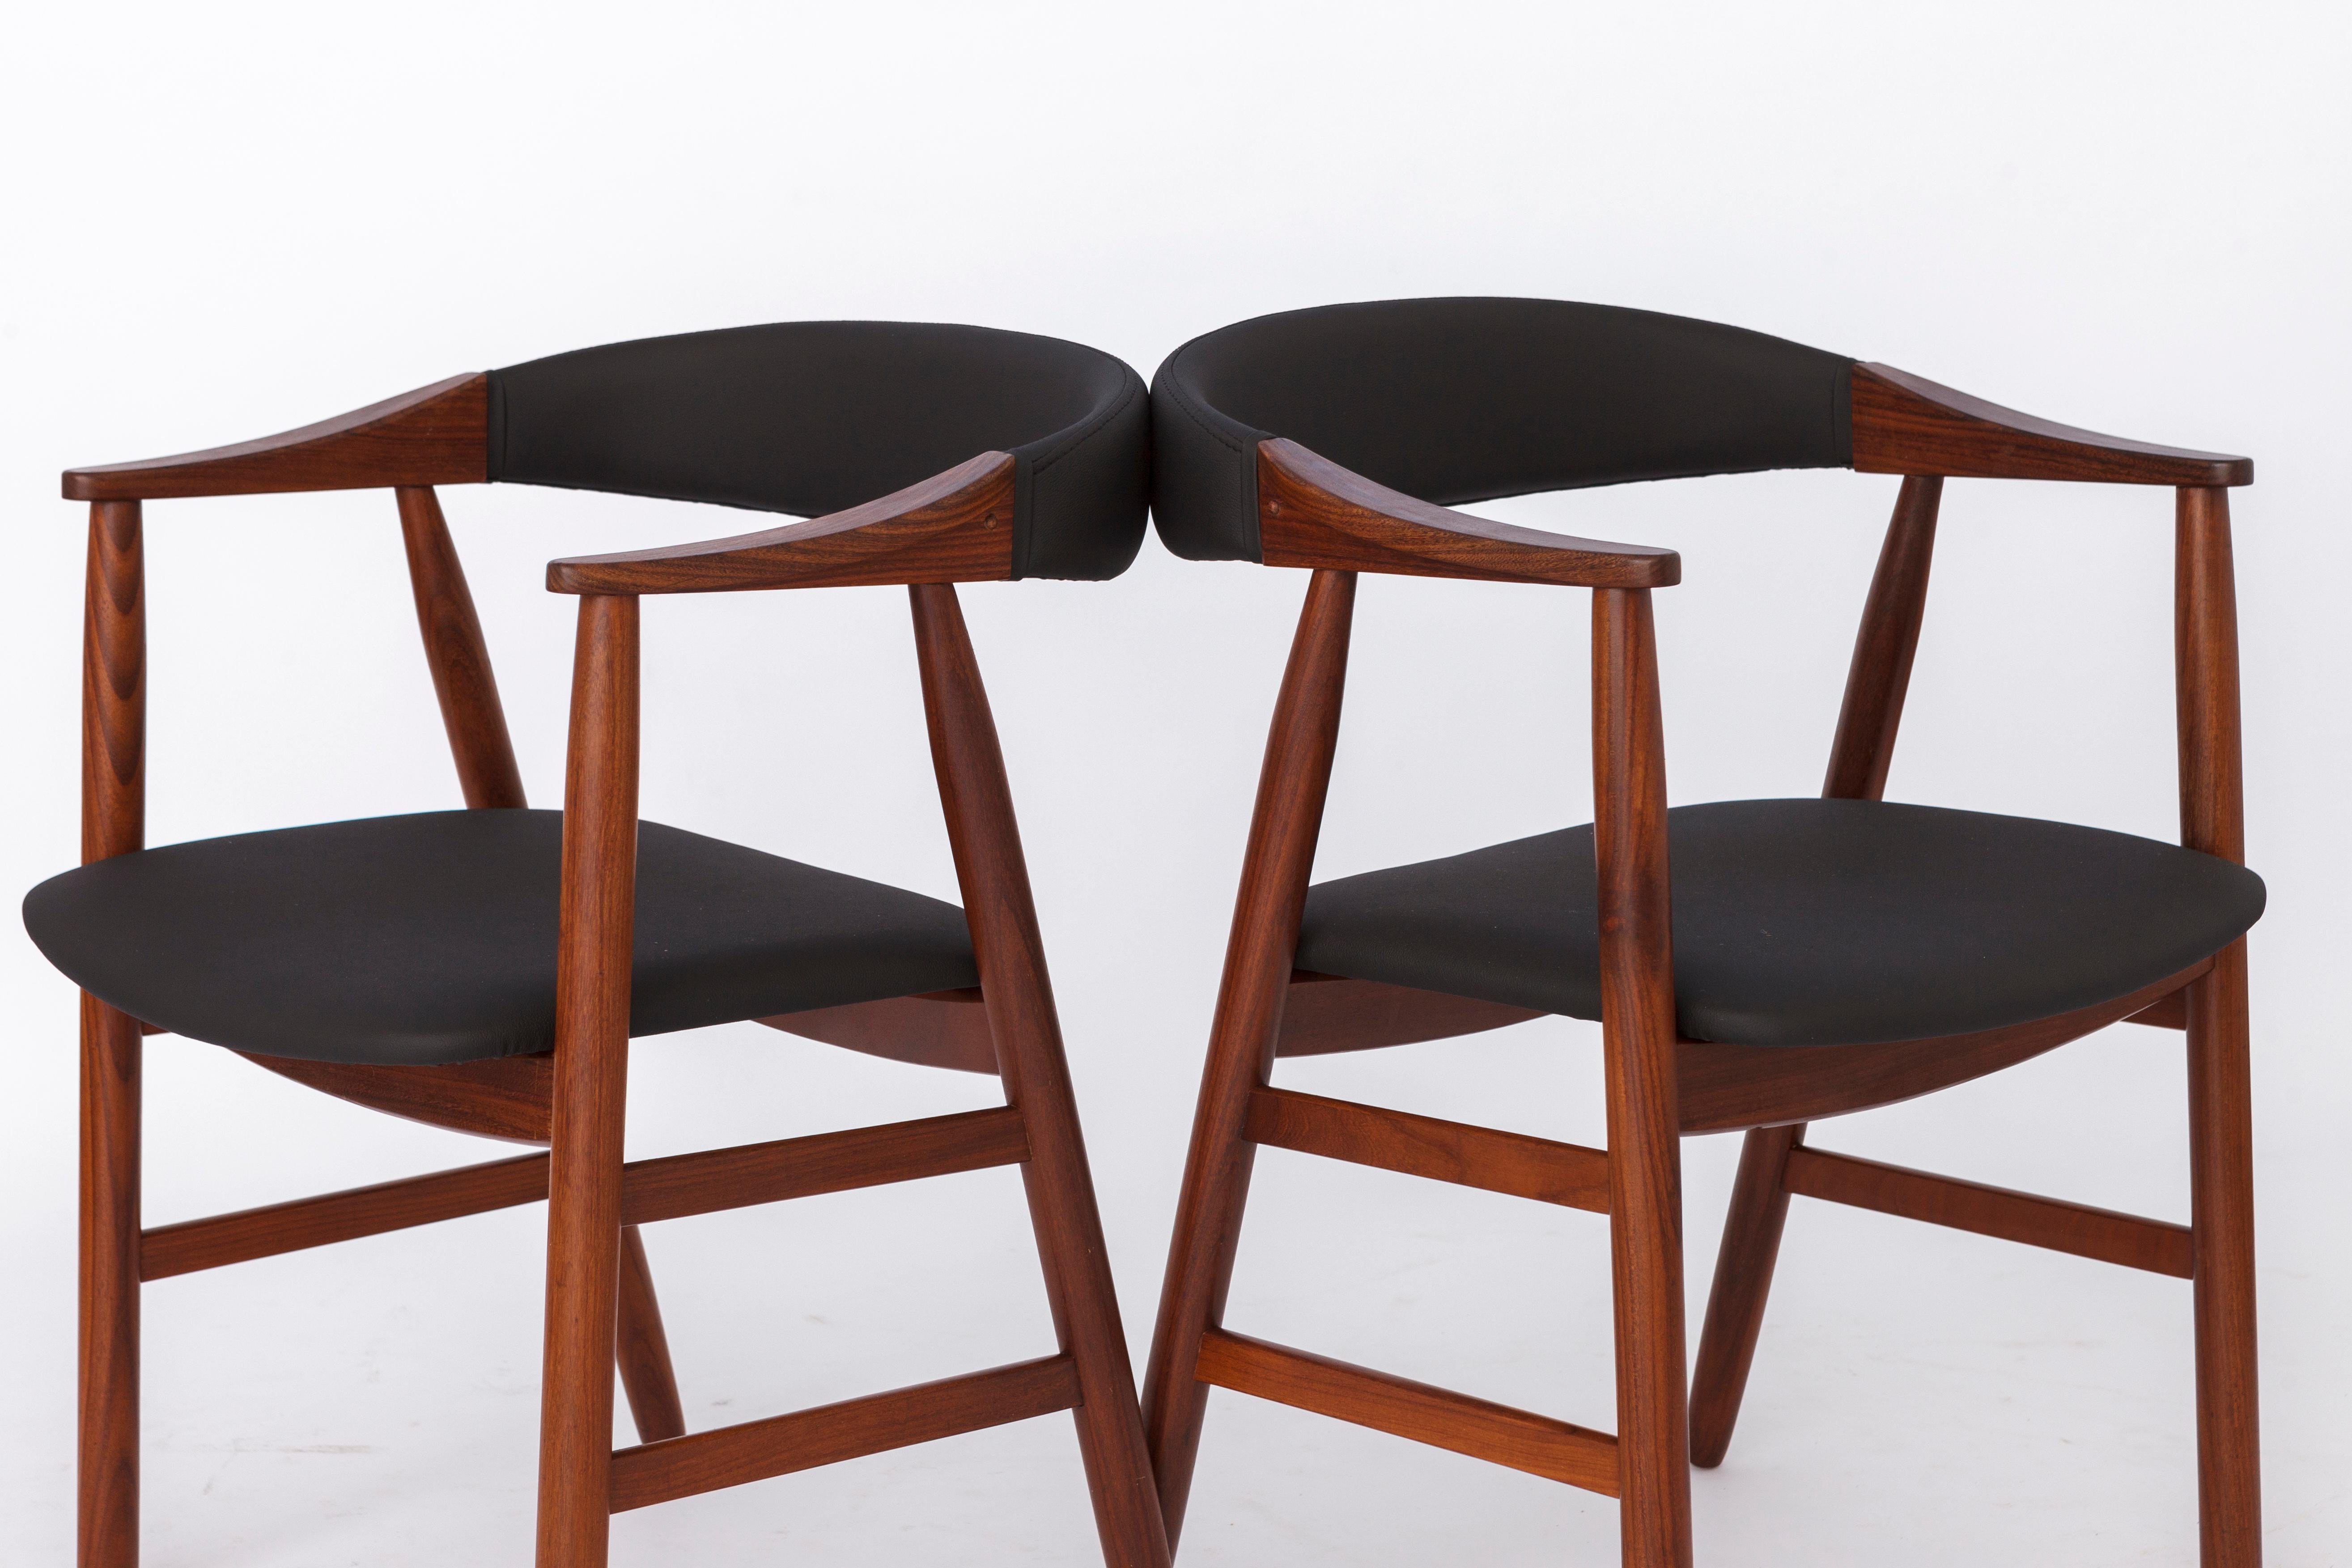 2 Vintage Chairs by Thomas Harlev, Model 213, Danish, for Farstrup, Teak, 1960s. For Sale 3